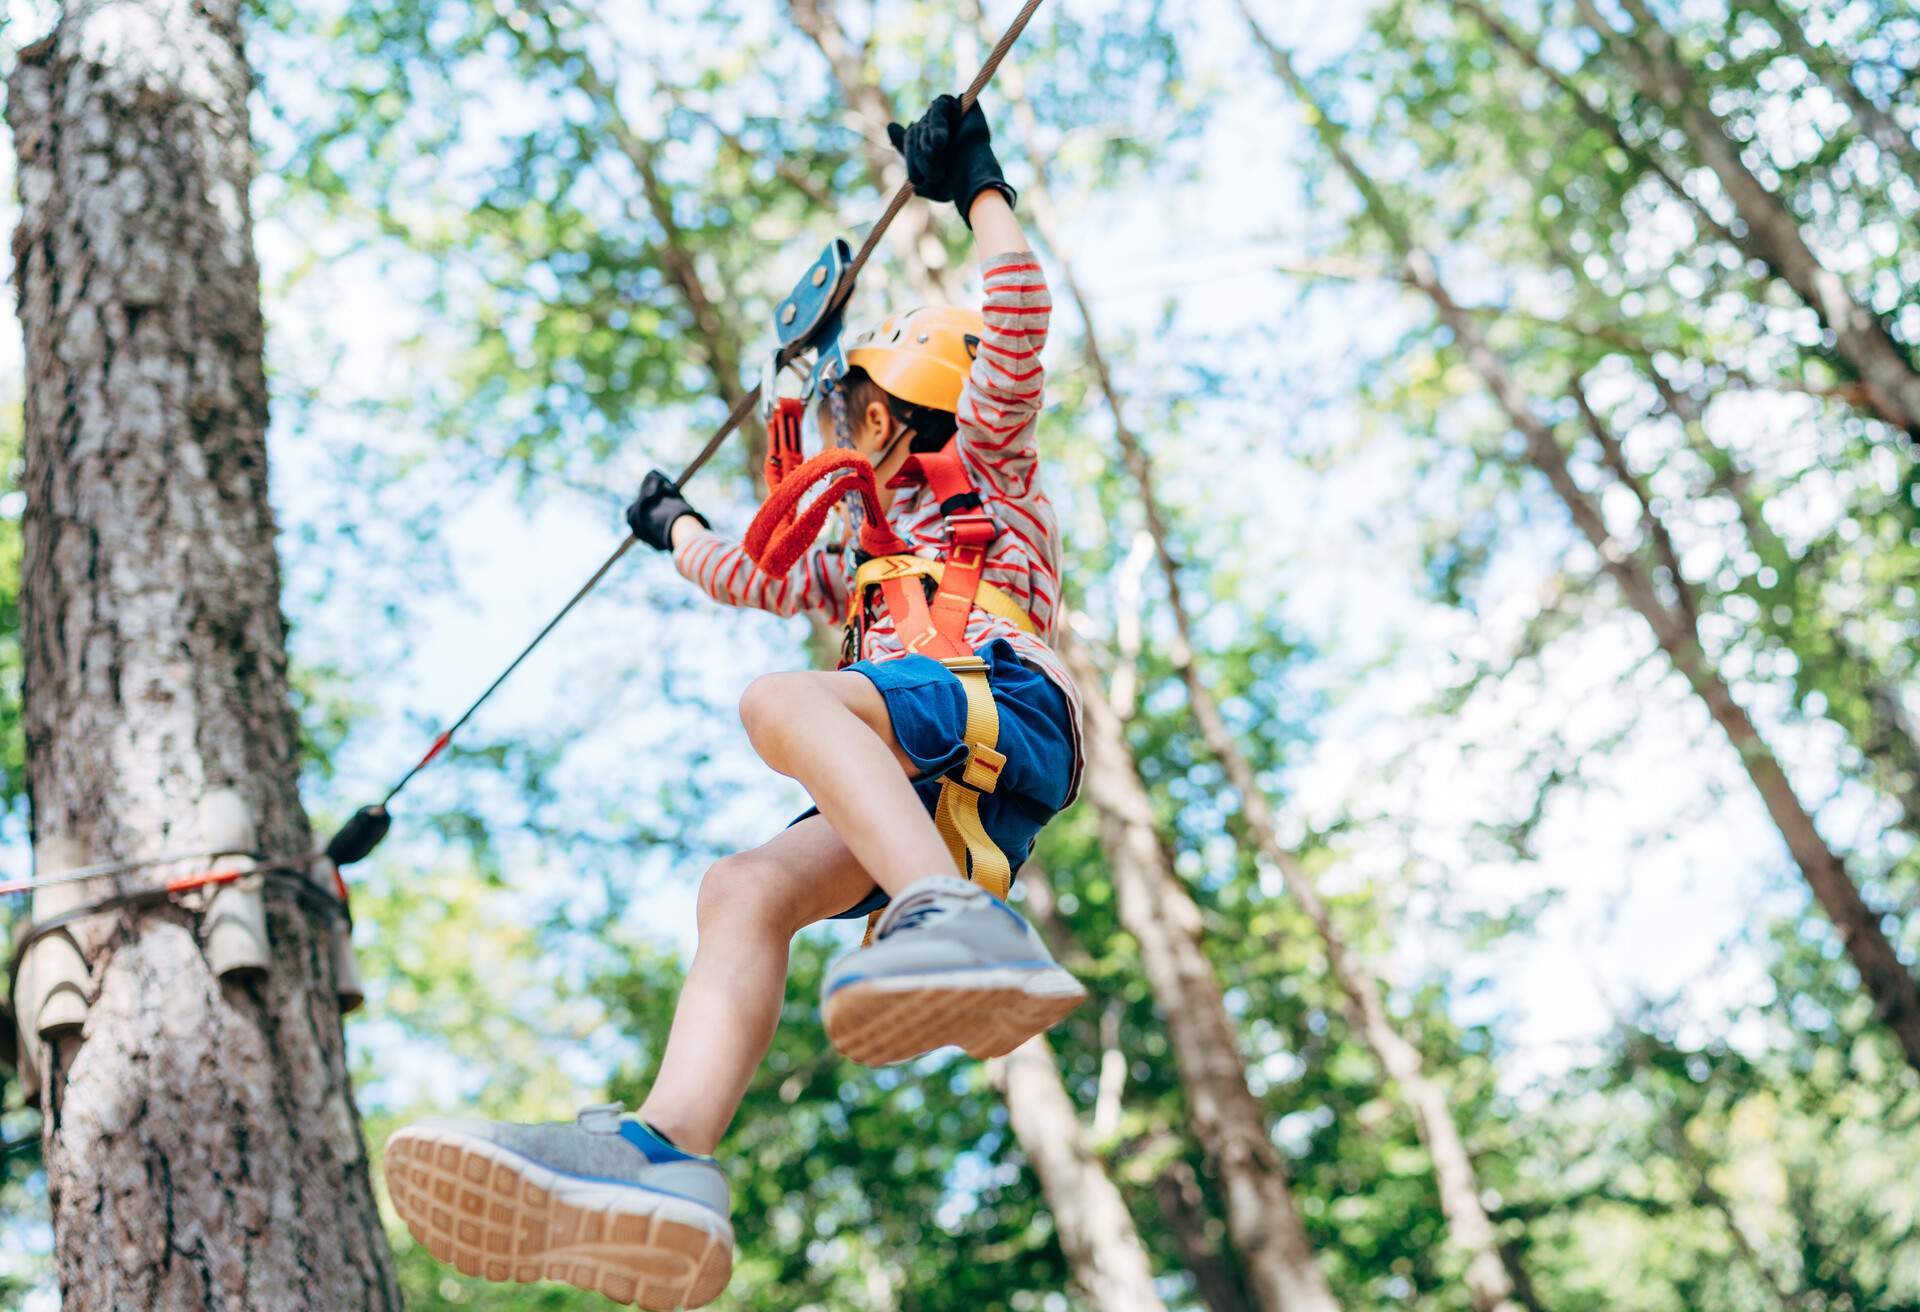 A kid hanging on the zipline holds on to the rope tight approaching a tree.